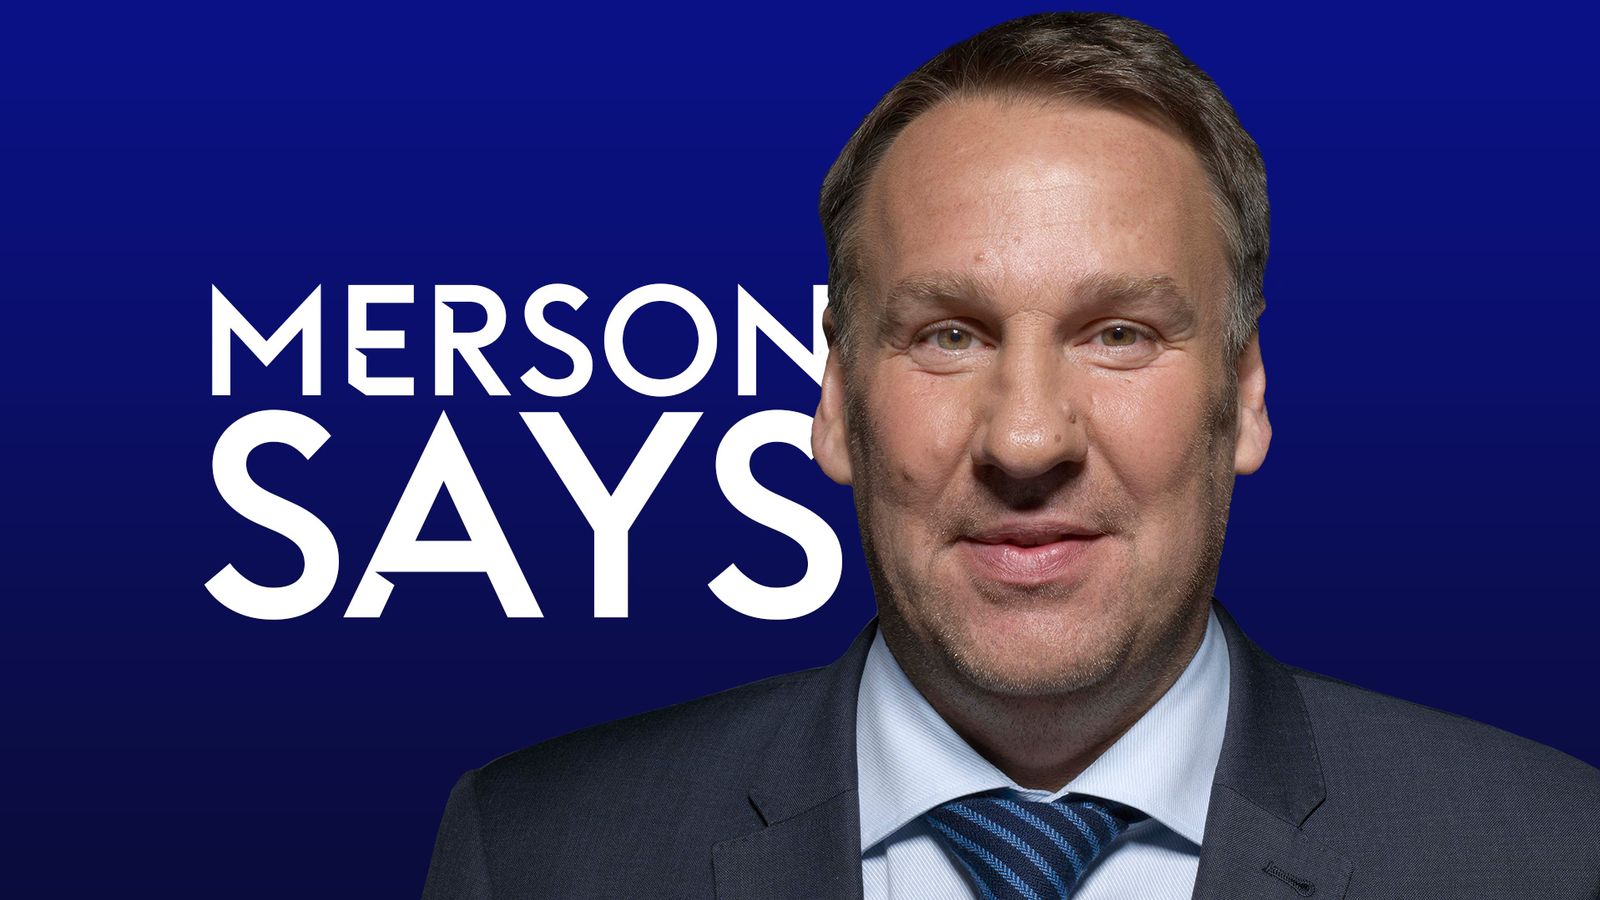 Jack Grealish doesn't fit in at Manchester City - and they might sell their £100m man, says Paul Merson - Sky Sports